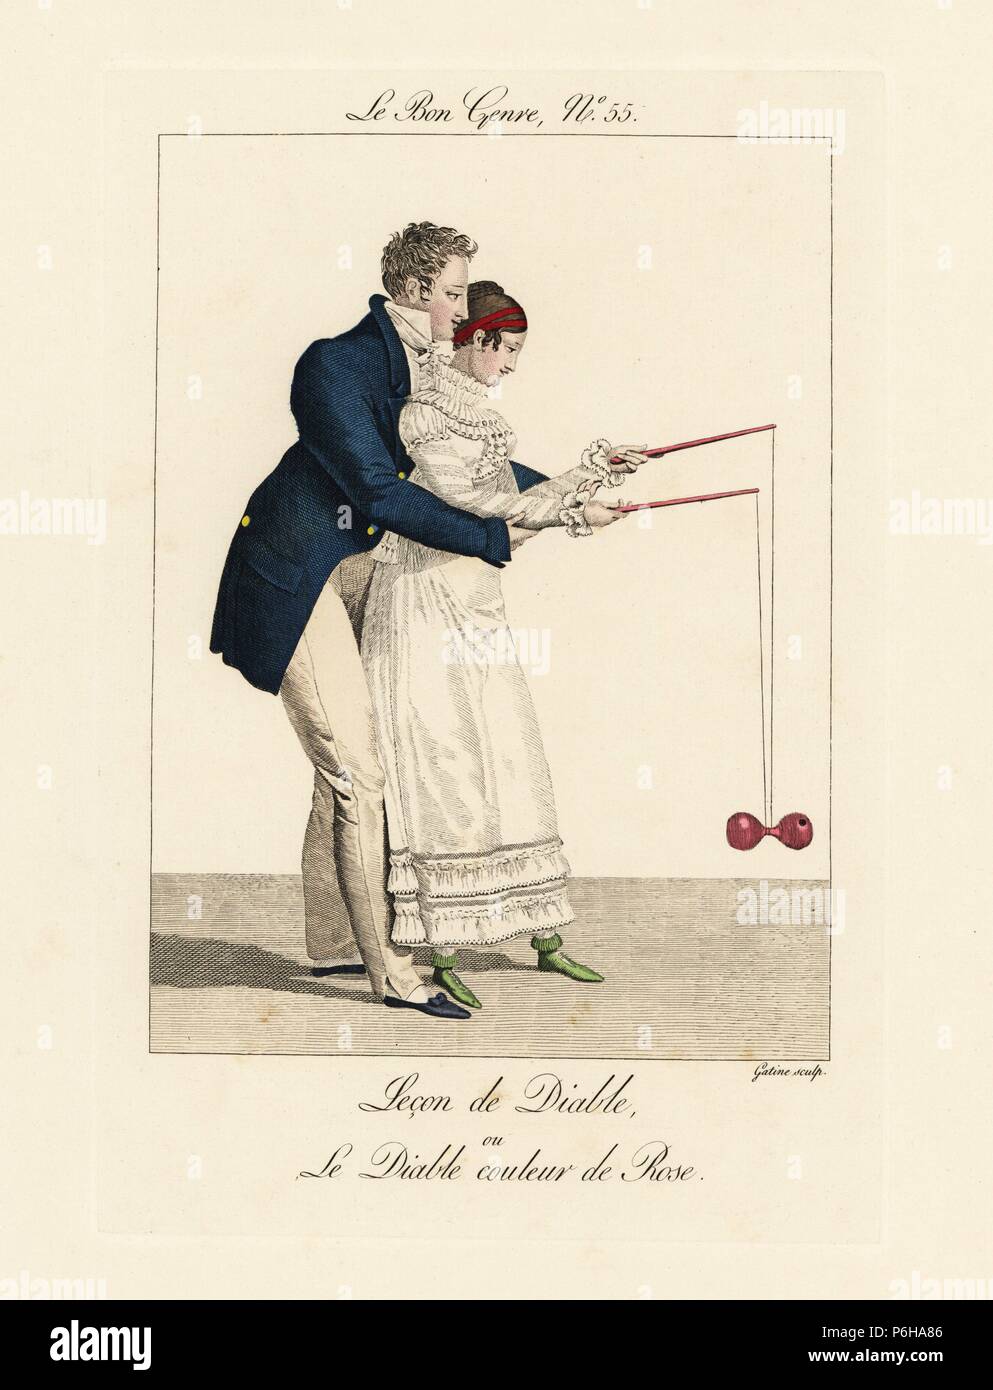 A young fashionable man shows a girl how to play with a Diabolo (Chinese  yo-yo). "Expertise on the Diabolo is now indispensable. A father who wants  to raise his children properly has